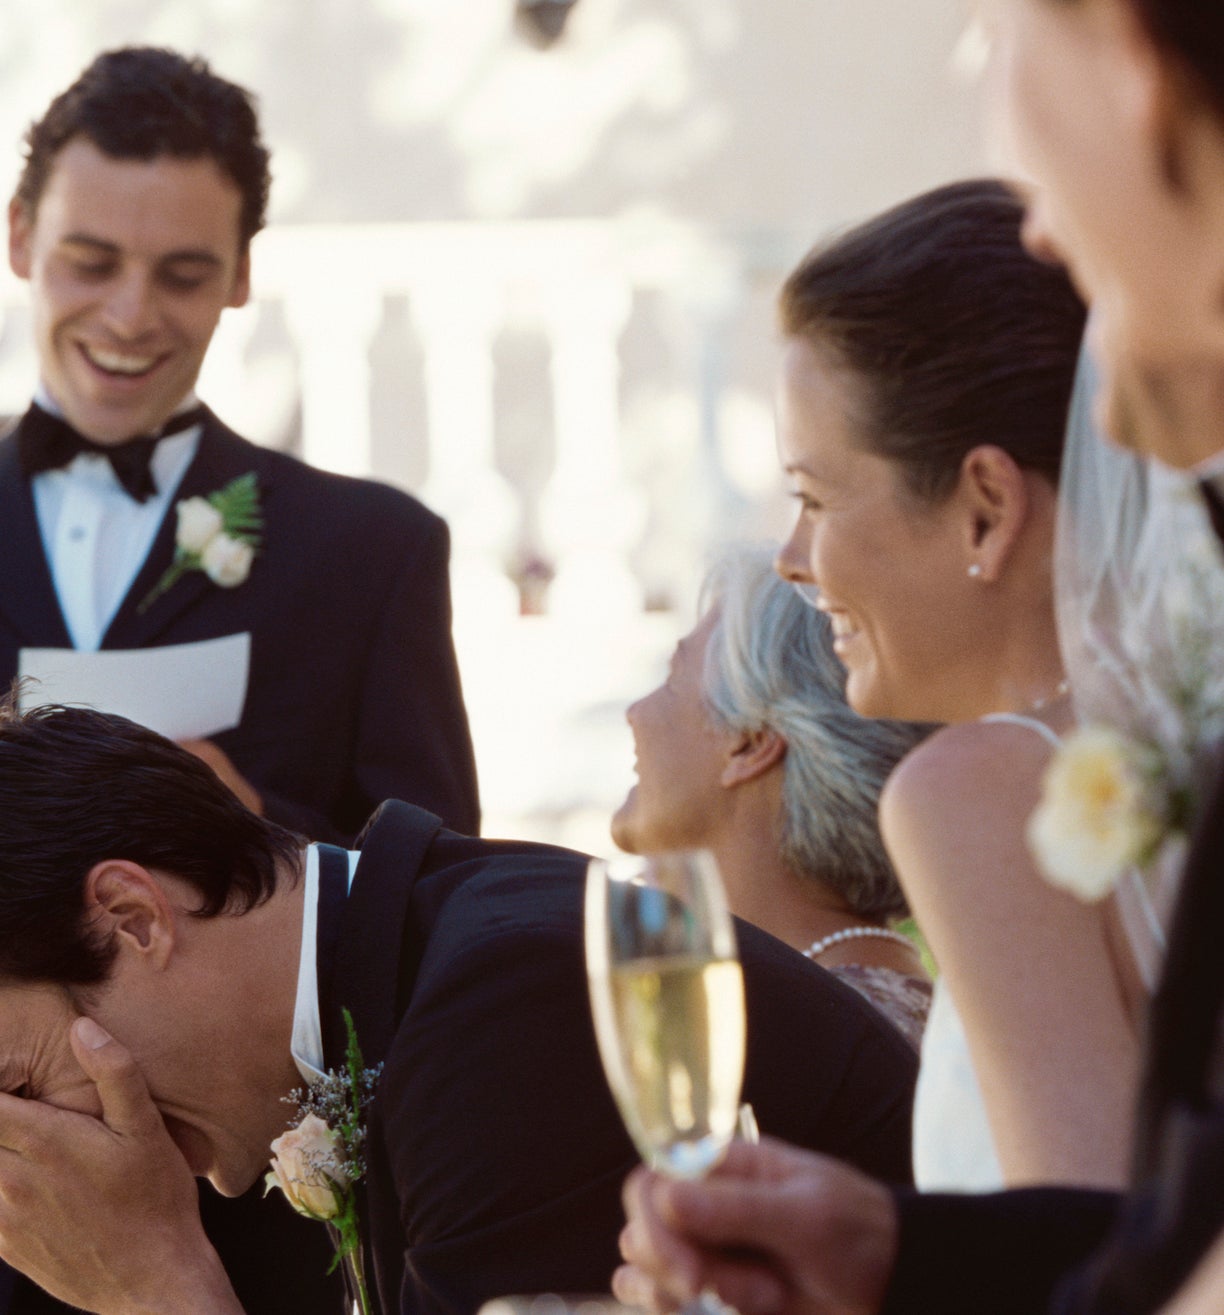 Groom laughing with hand on face, bride smiling beside him, man giving speech at wedding